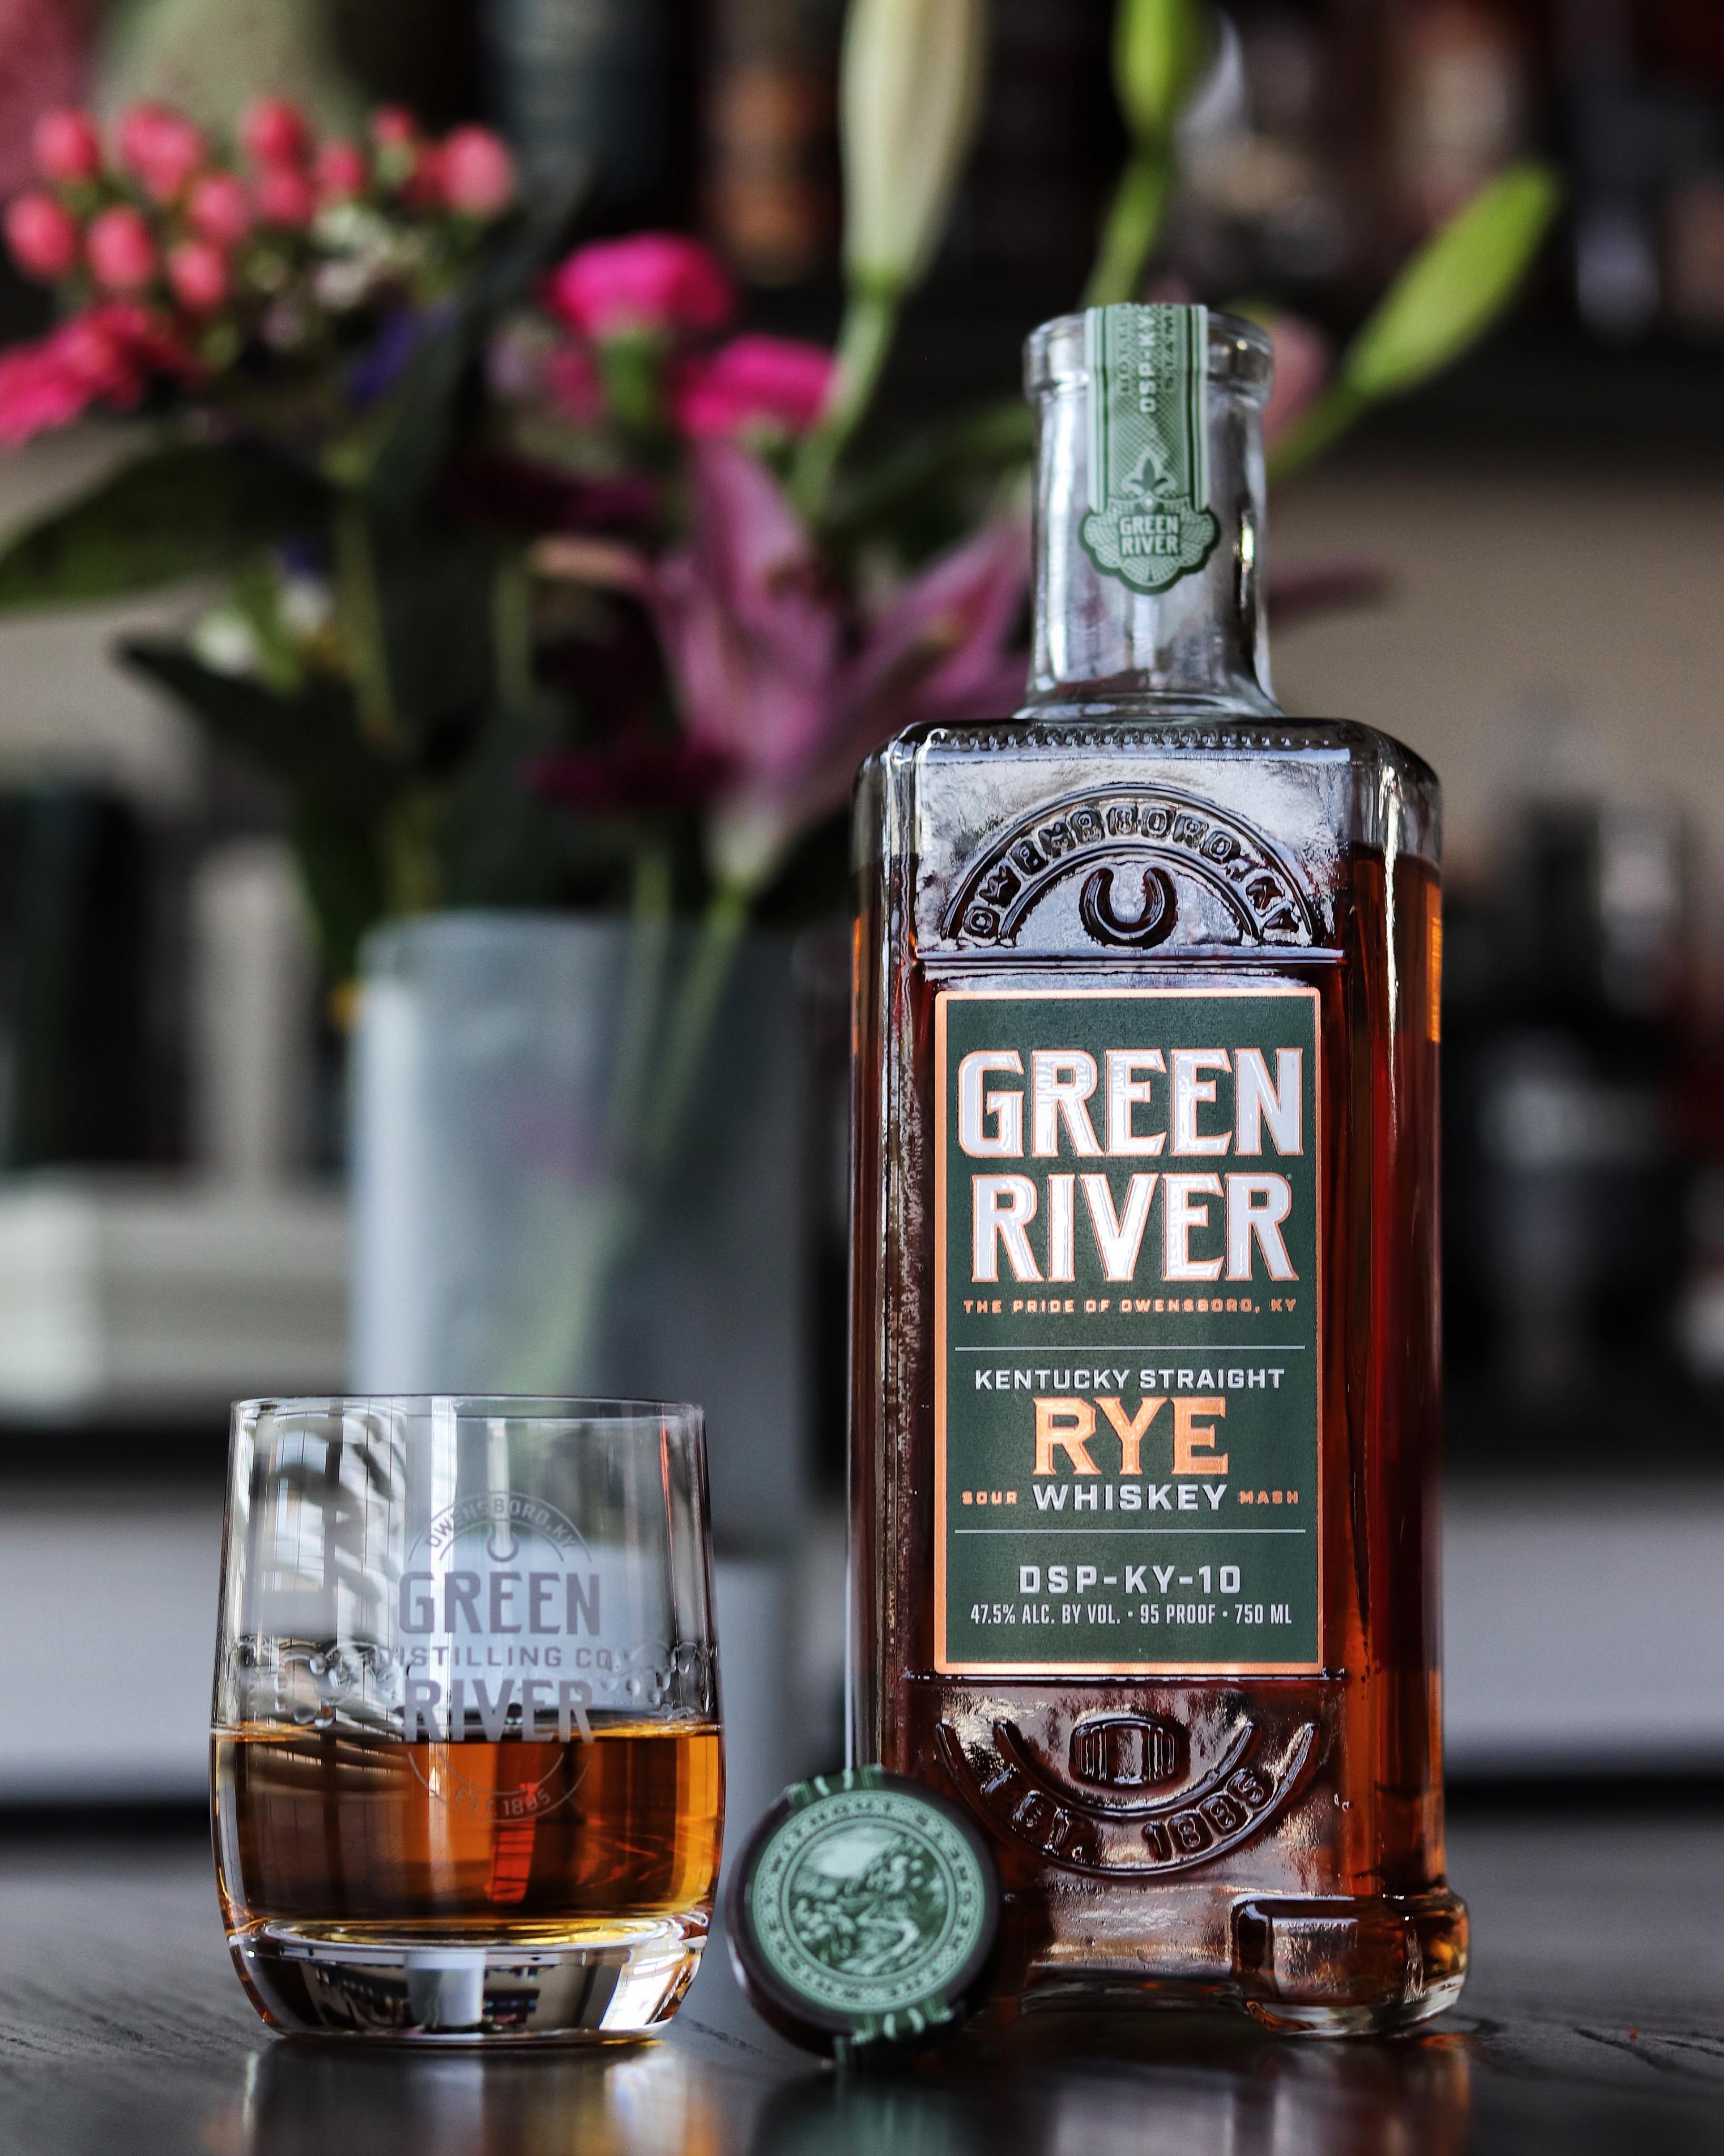 Green River Distilling Co.’s New Rye Whiskey Reviewed